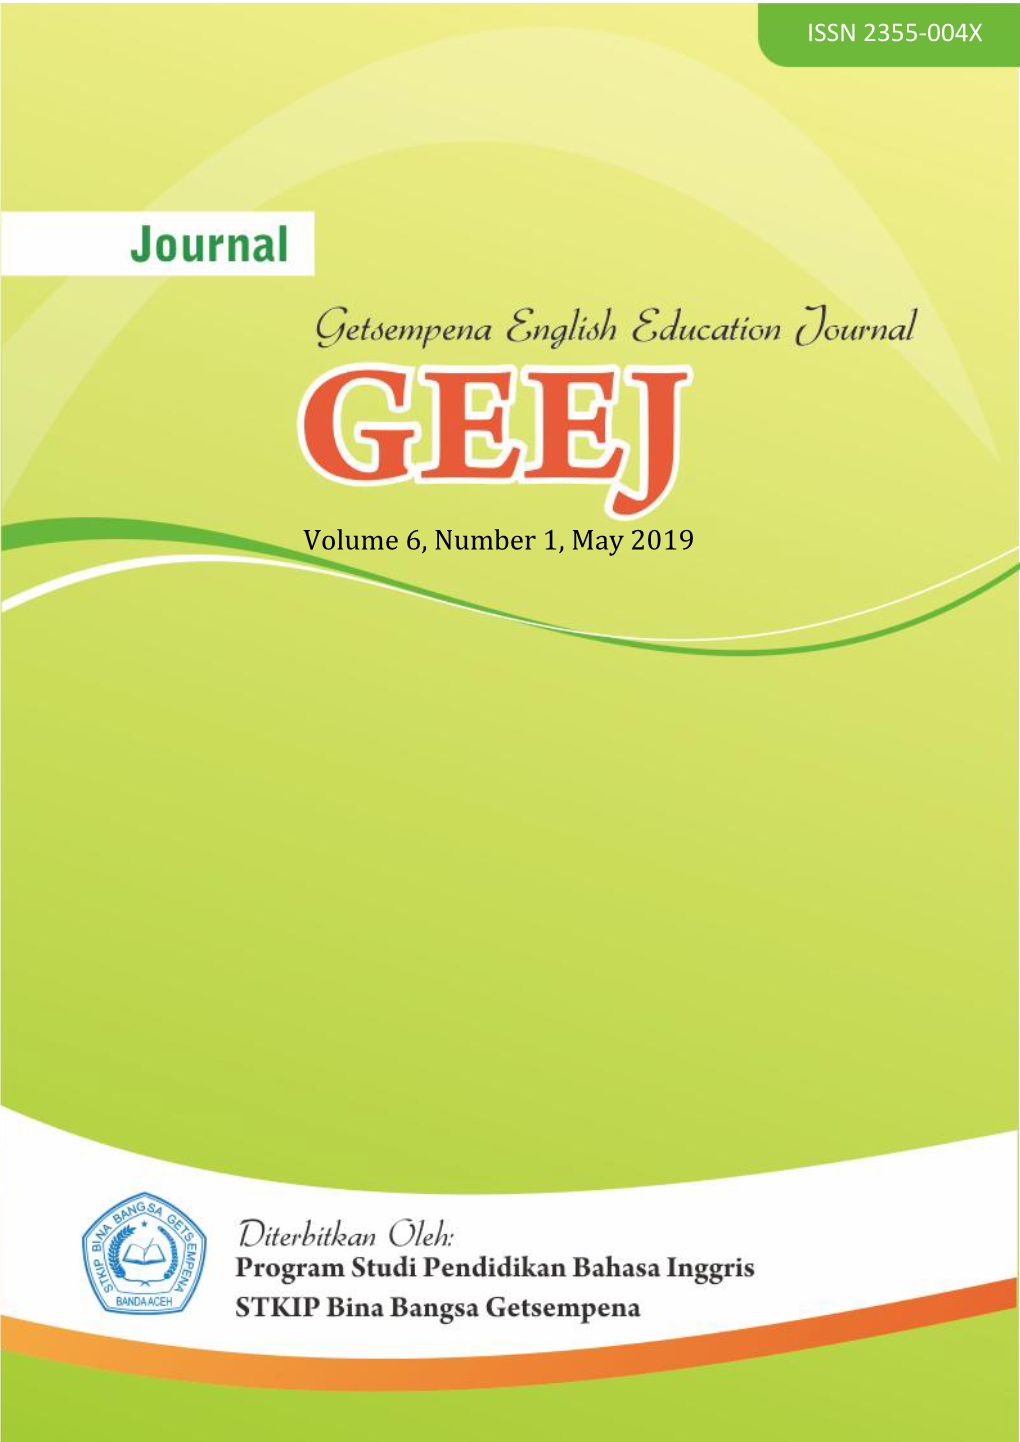 Volume 6, Number 1, May 2019